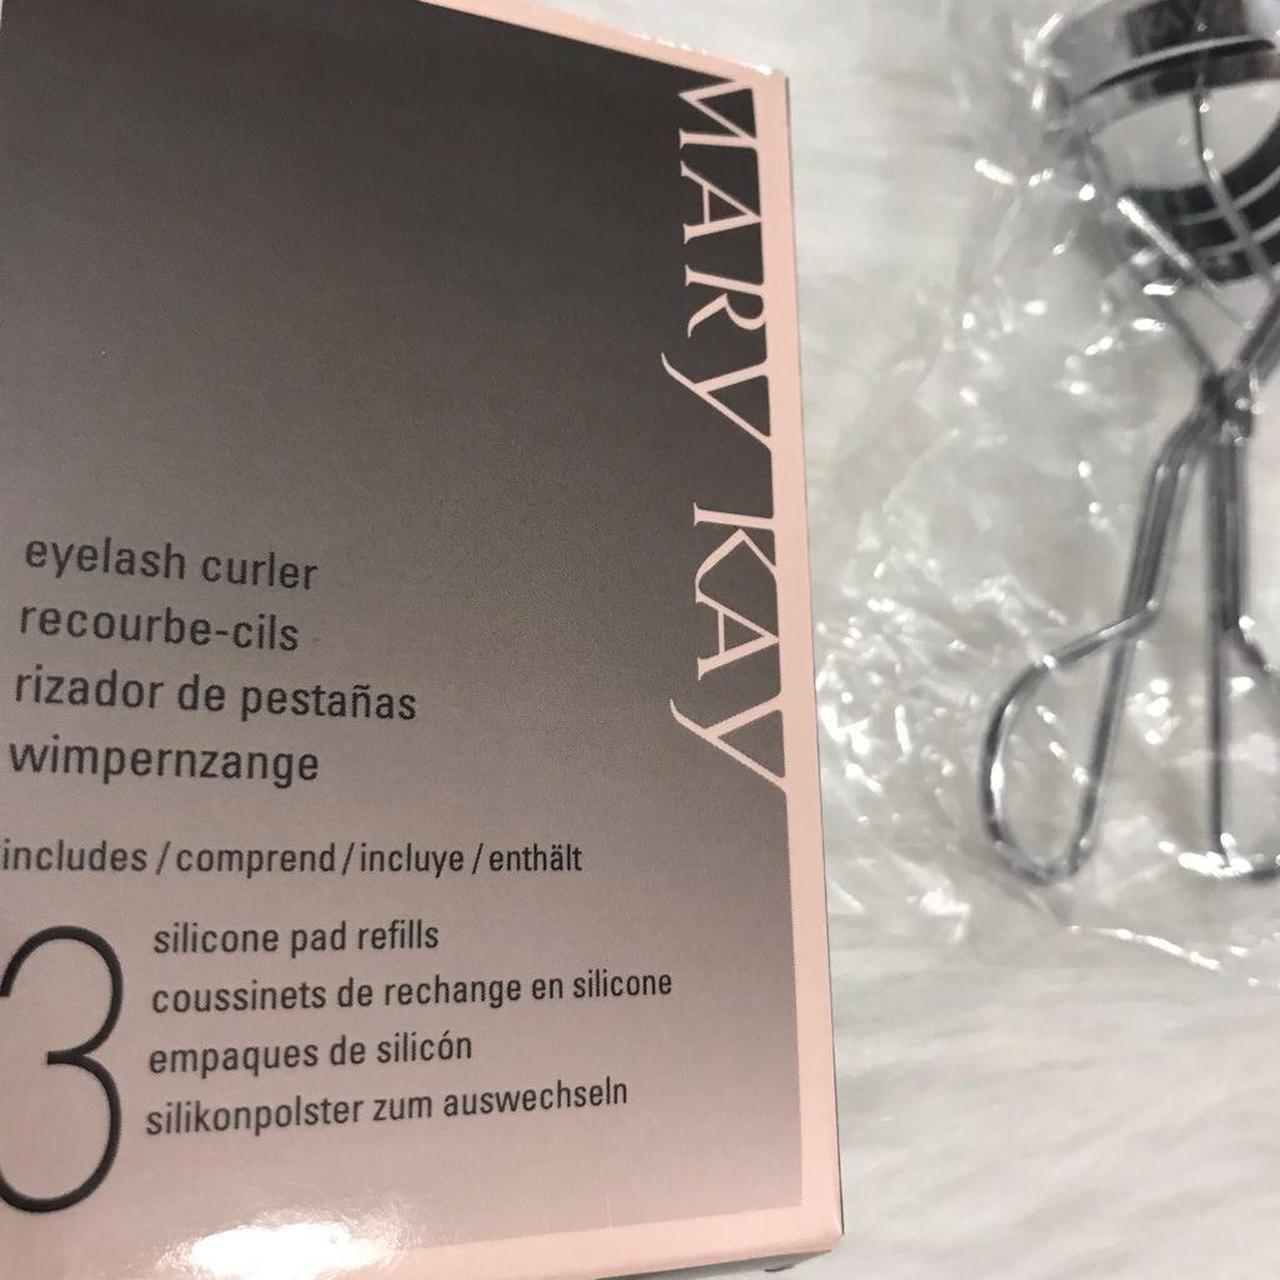 Product Image 3 - Mary Kay eye lash curler
Includes